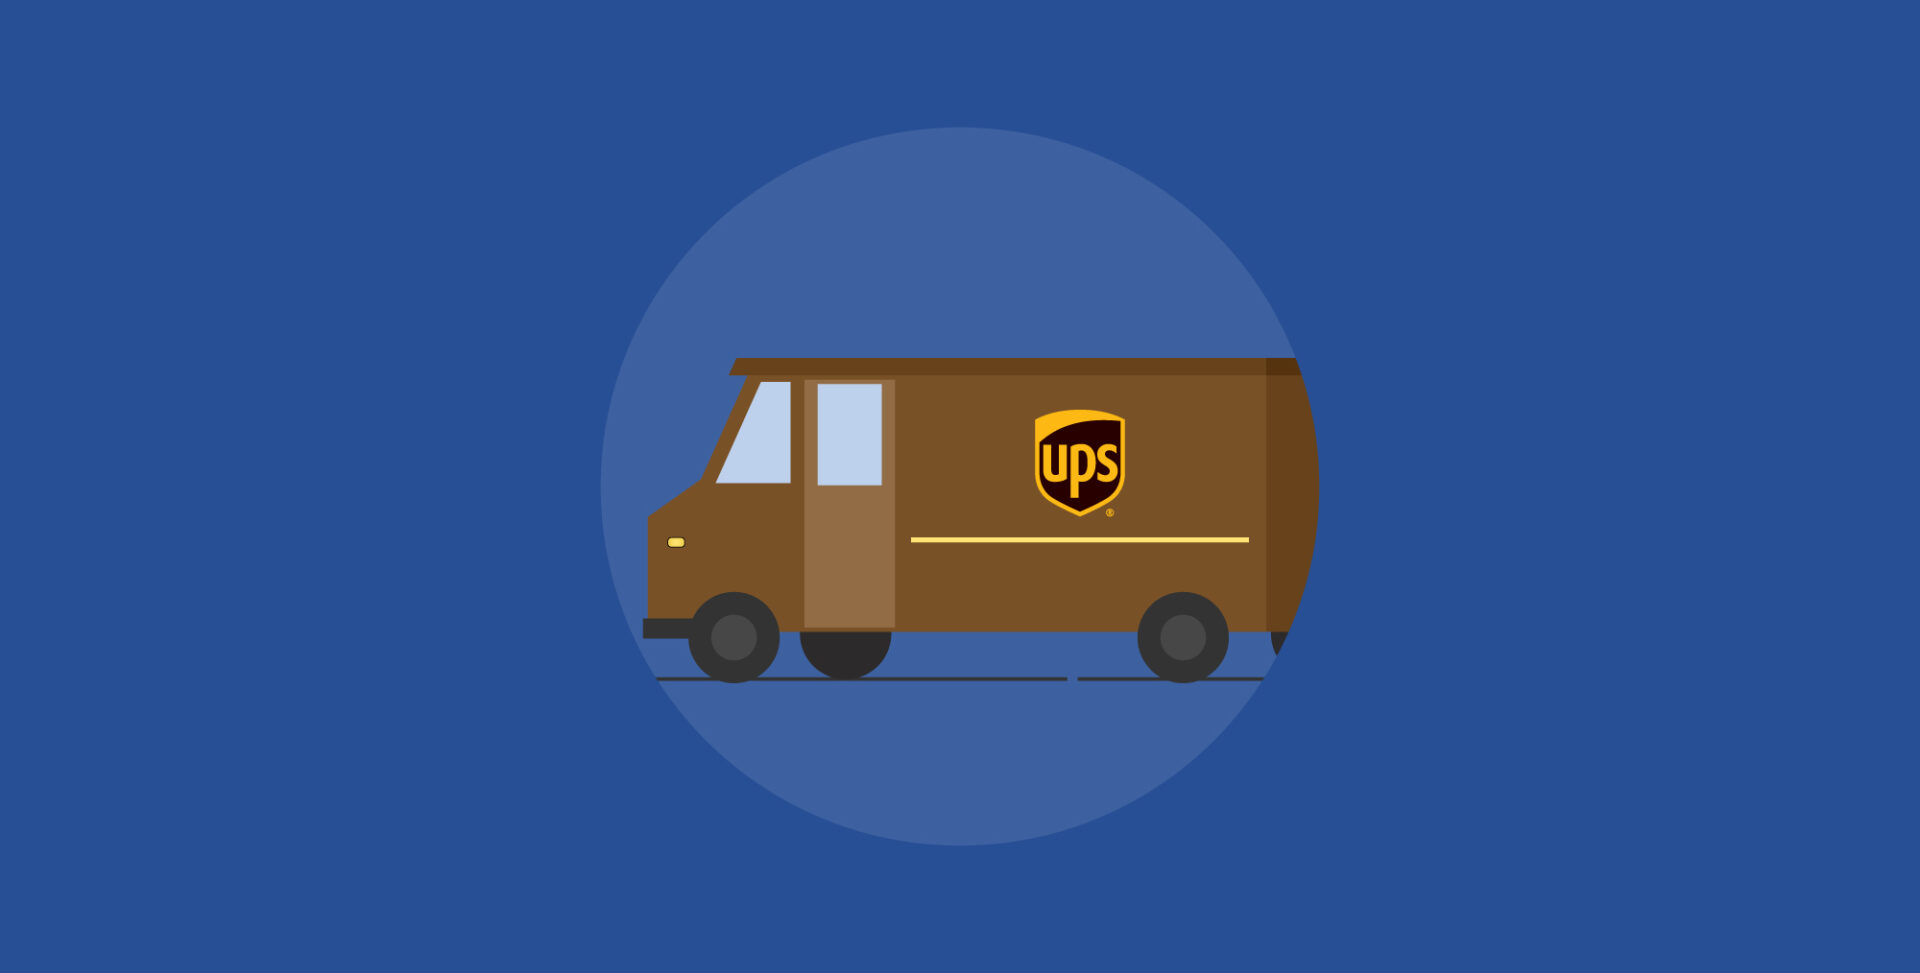 Learn more about UPS in our blog!